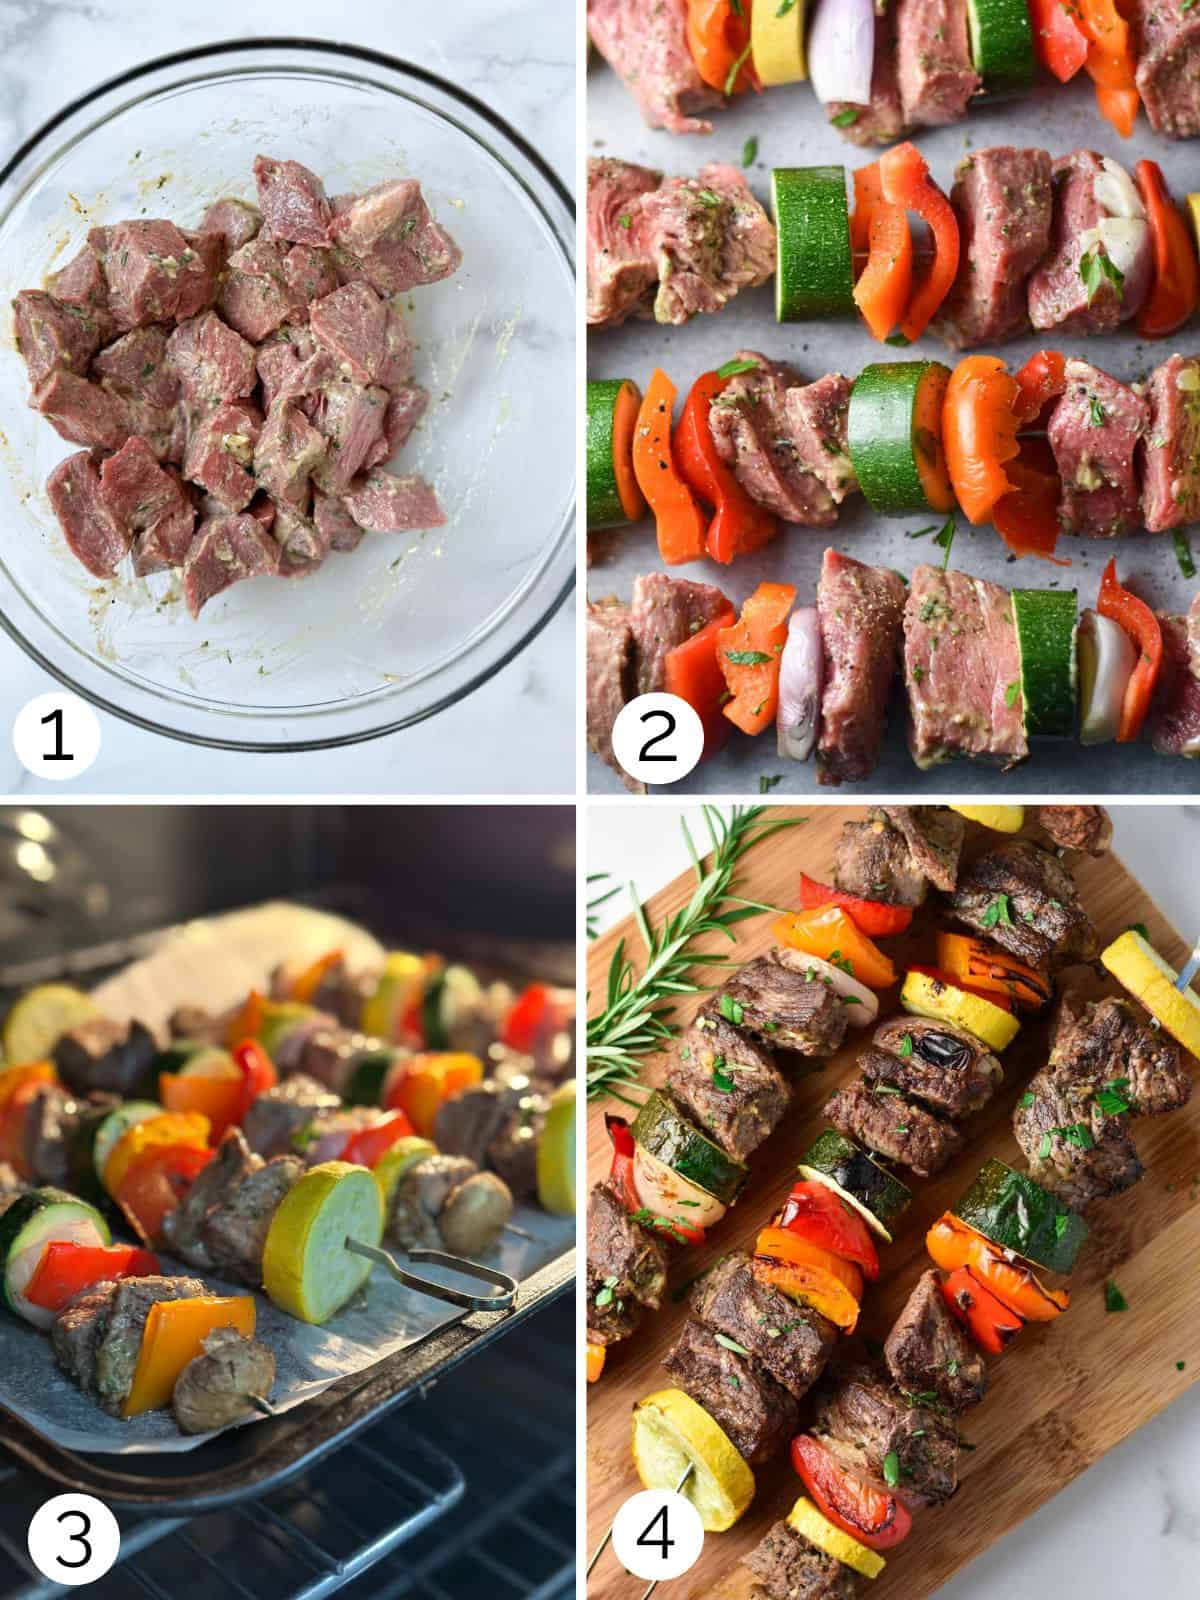 Process photos showing marinating the beef, layering the beef and vegetables, baking the kabobs, and letting them cool.